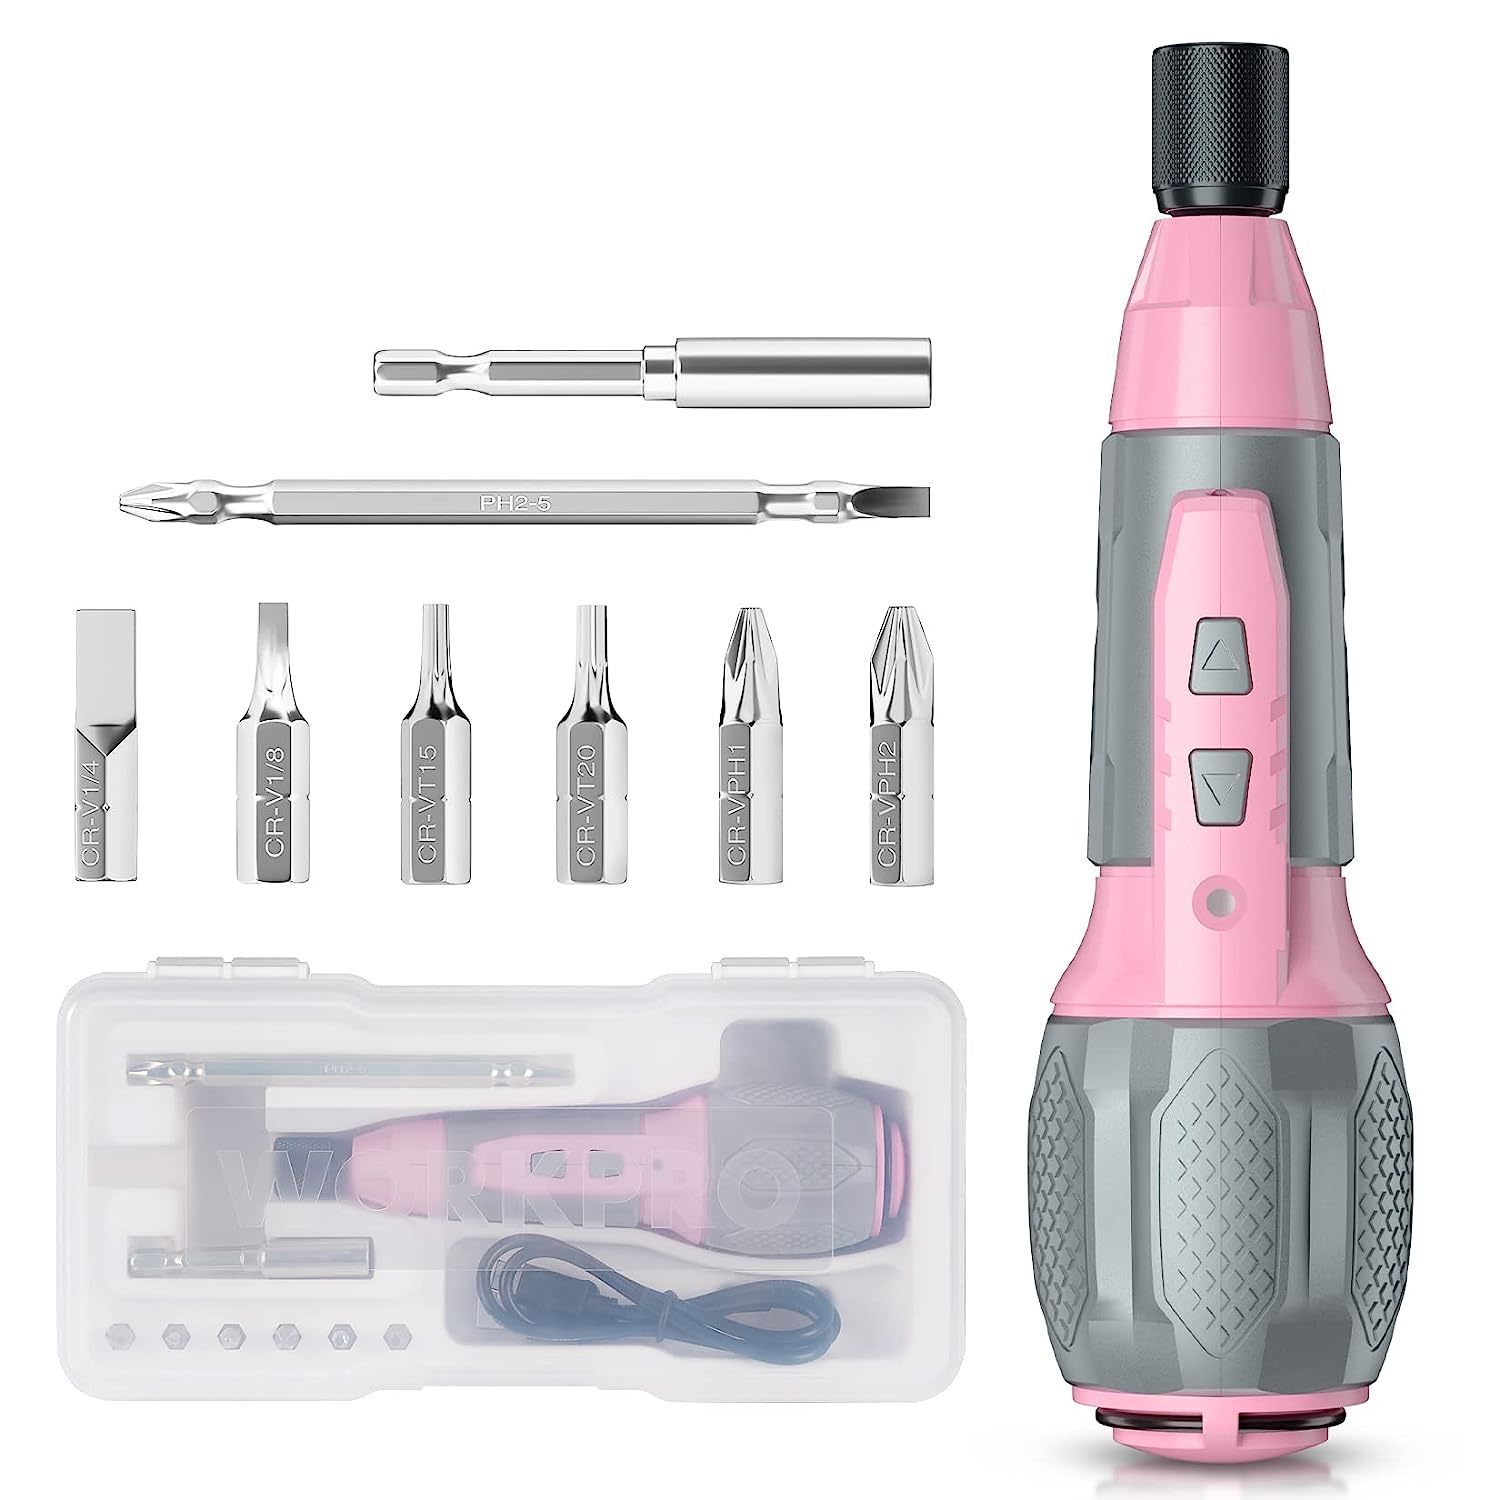 WORKPRO Pink Electric Cordless Screwdriver Set, 4V USB Rechargeable Lithium-ion  - $43.69